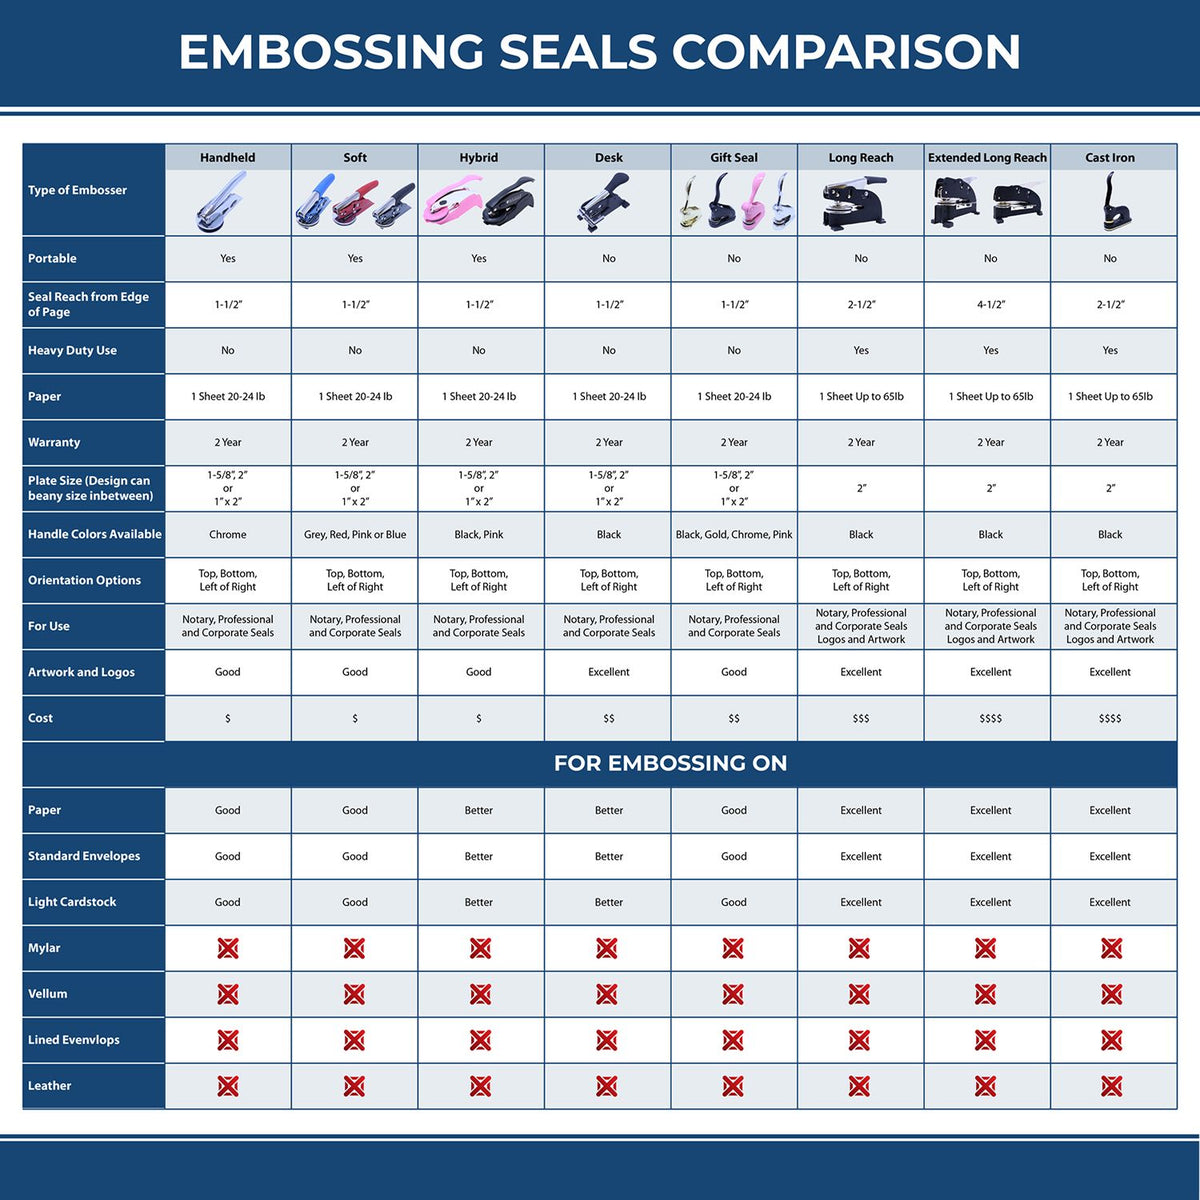 A comparison chart for the different types of mount models available for the Extended Long Reach Idaho Surveyor Embosser.